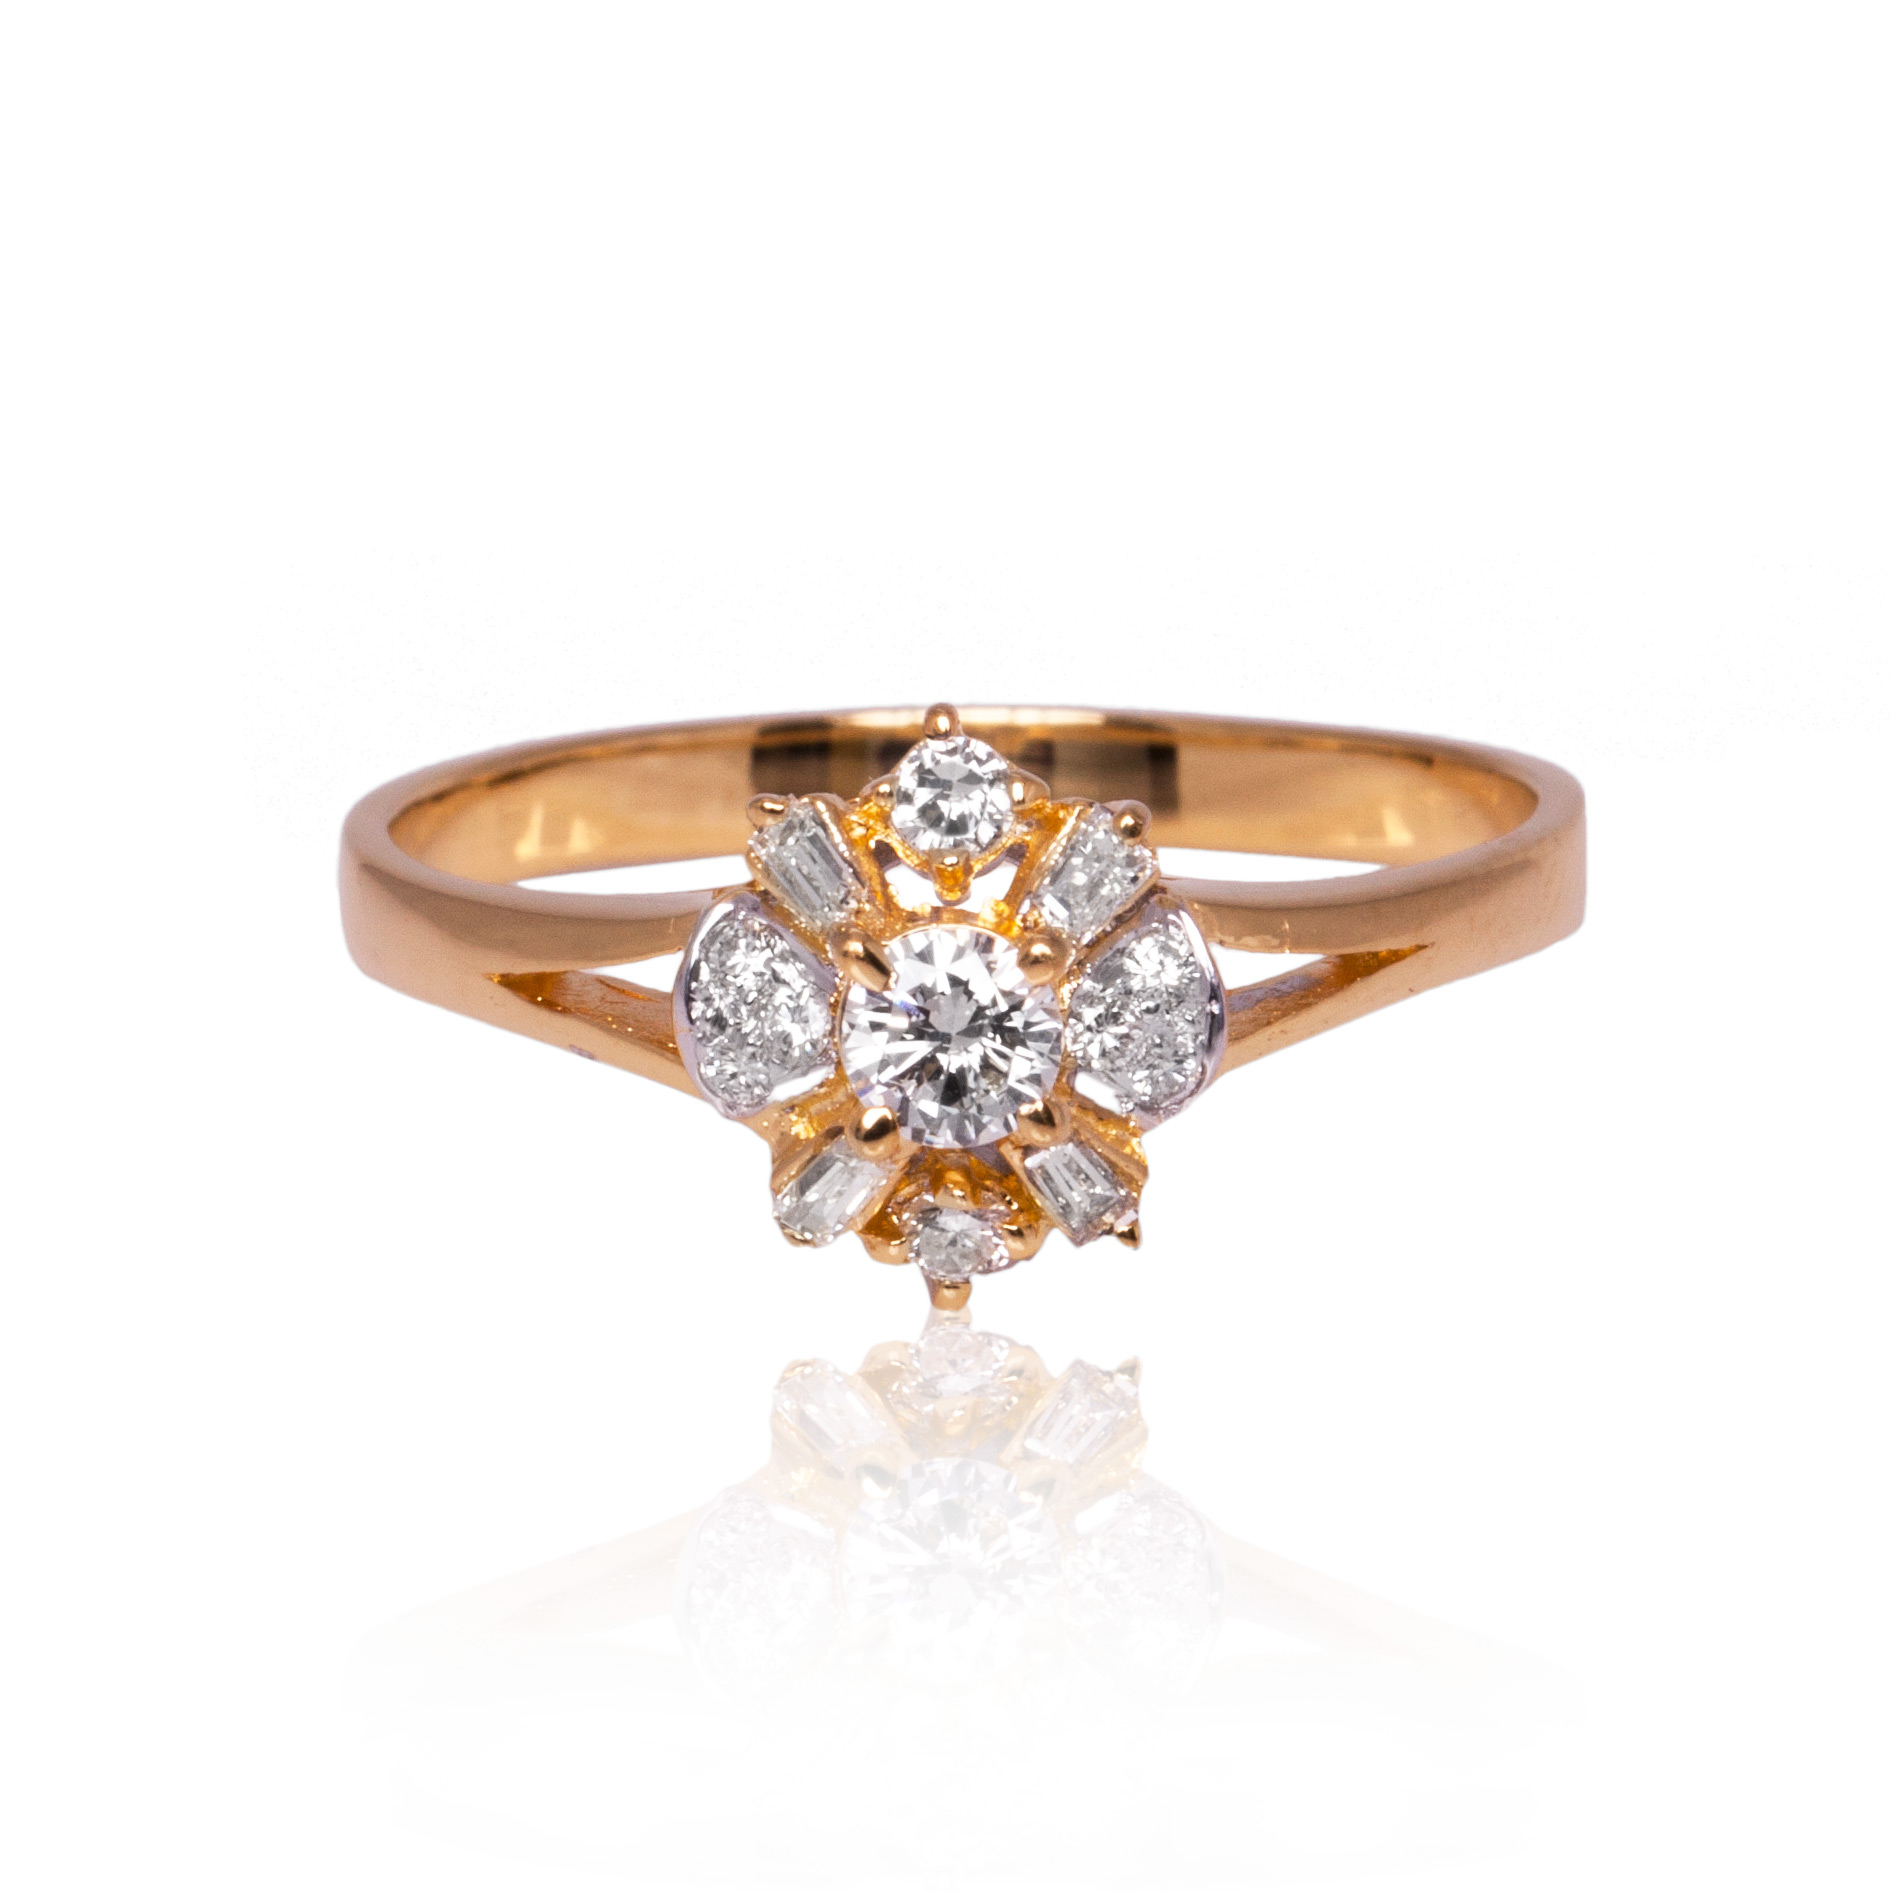 182-continental-jewels-manufacturers-ring-cjr000182-18k-yellow-gold-vvs1-diamonds-customised-ring.jpg